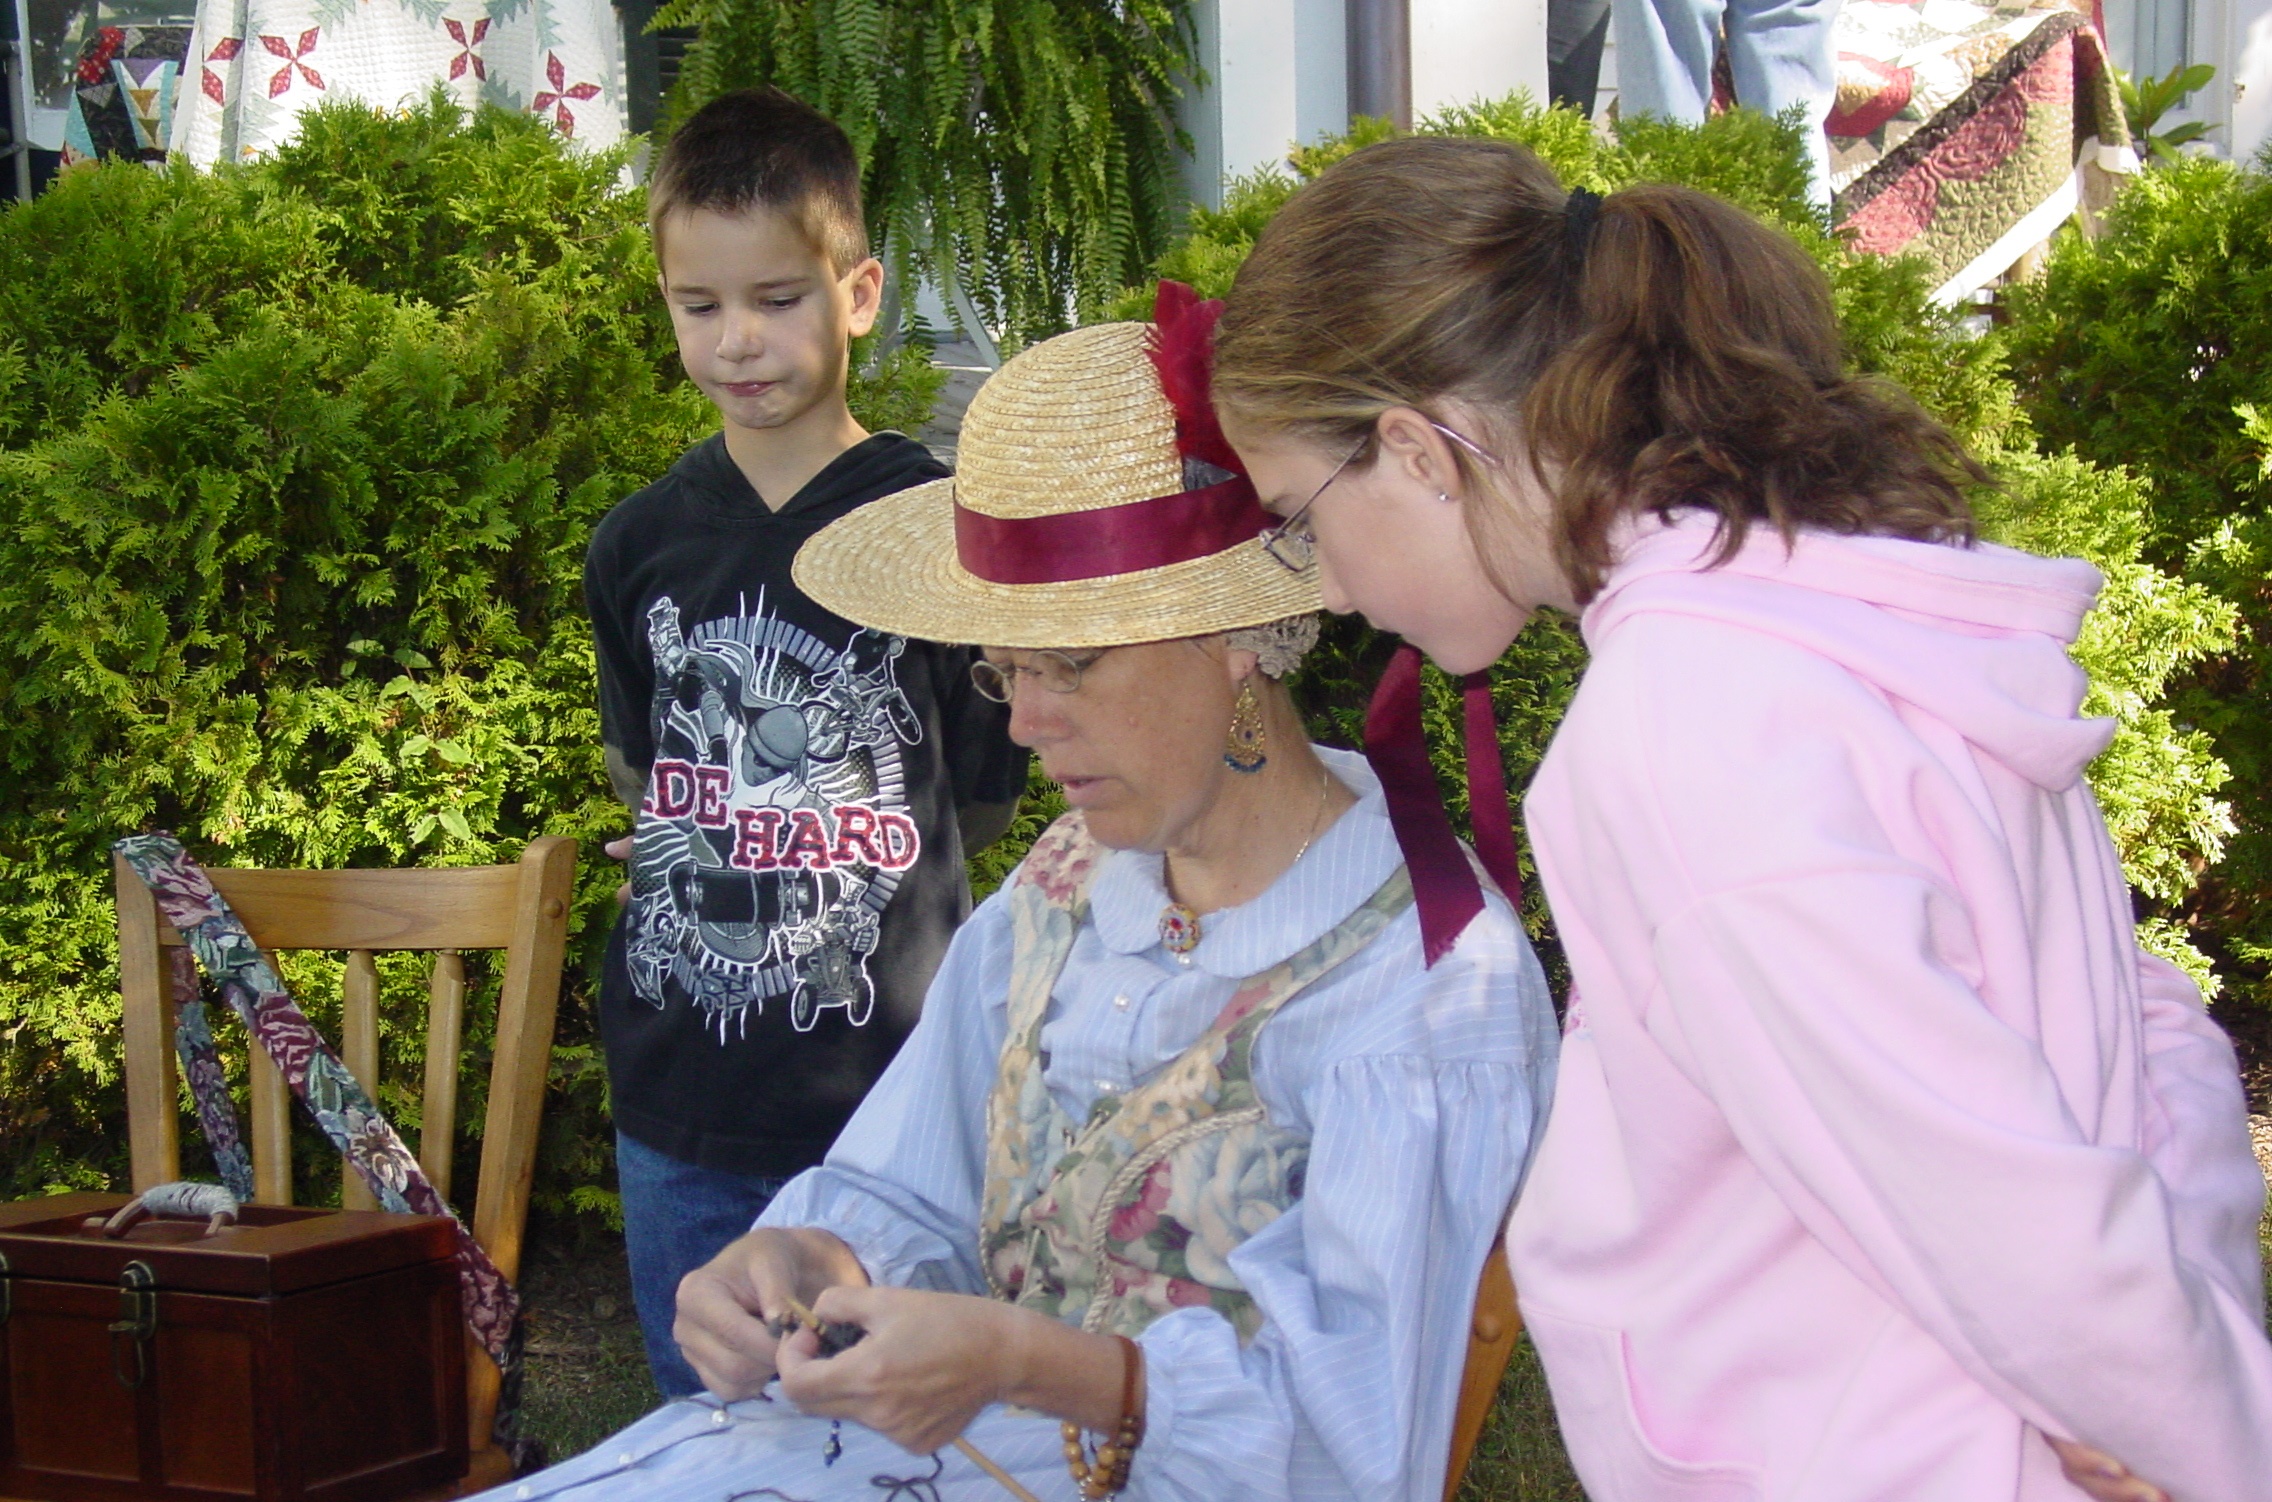 Children watch a woman in period costume demonstrate knitting during Down Home Days, a heritage festival celebrated each spring in downtown Chickamauga